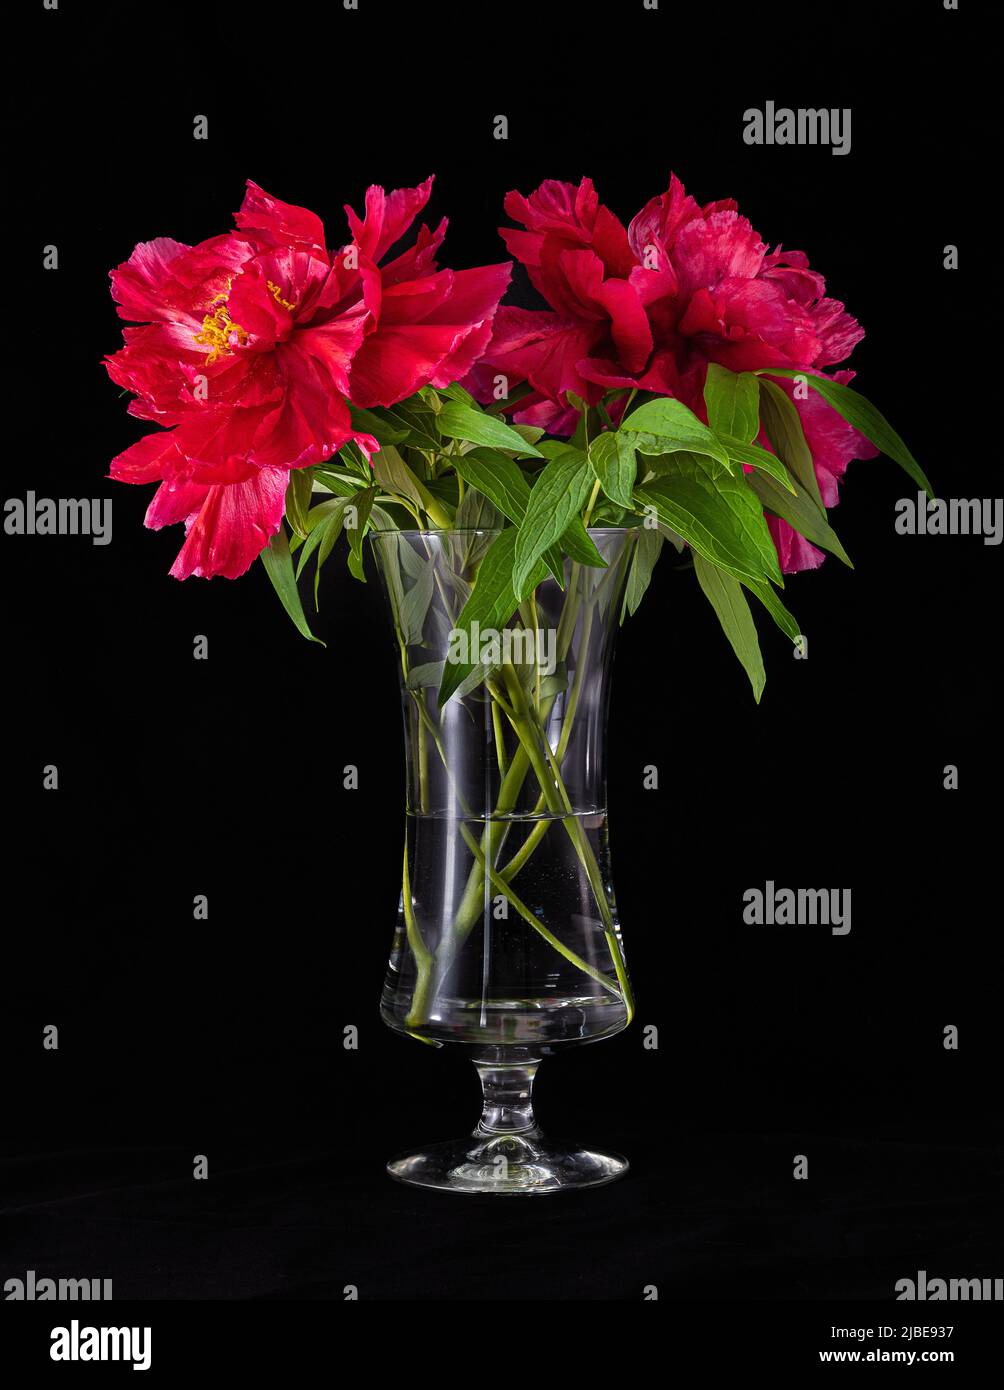 Peonies in a bottle on a black background. Still life photography. Fits in decorative frame. Stock Photo